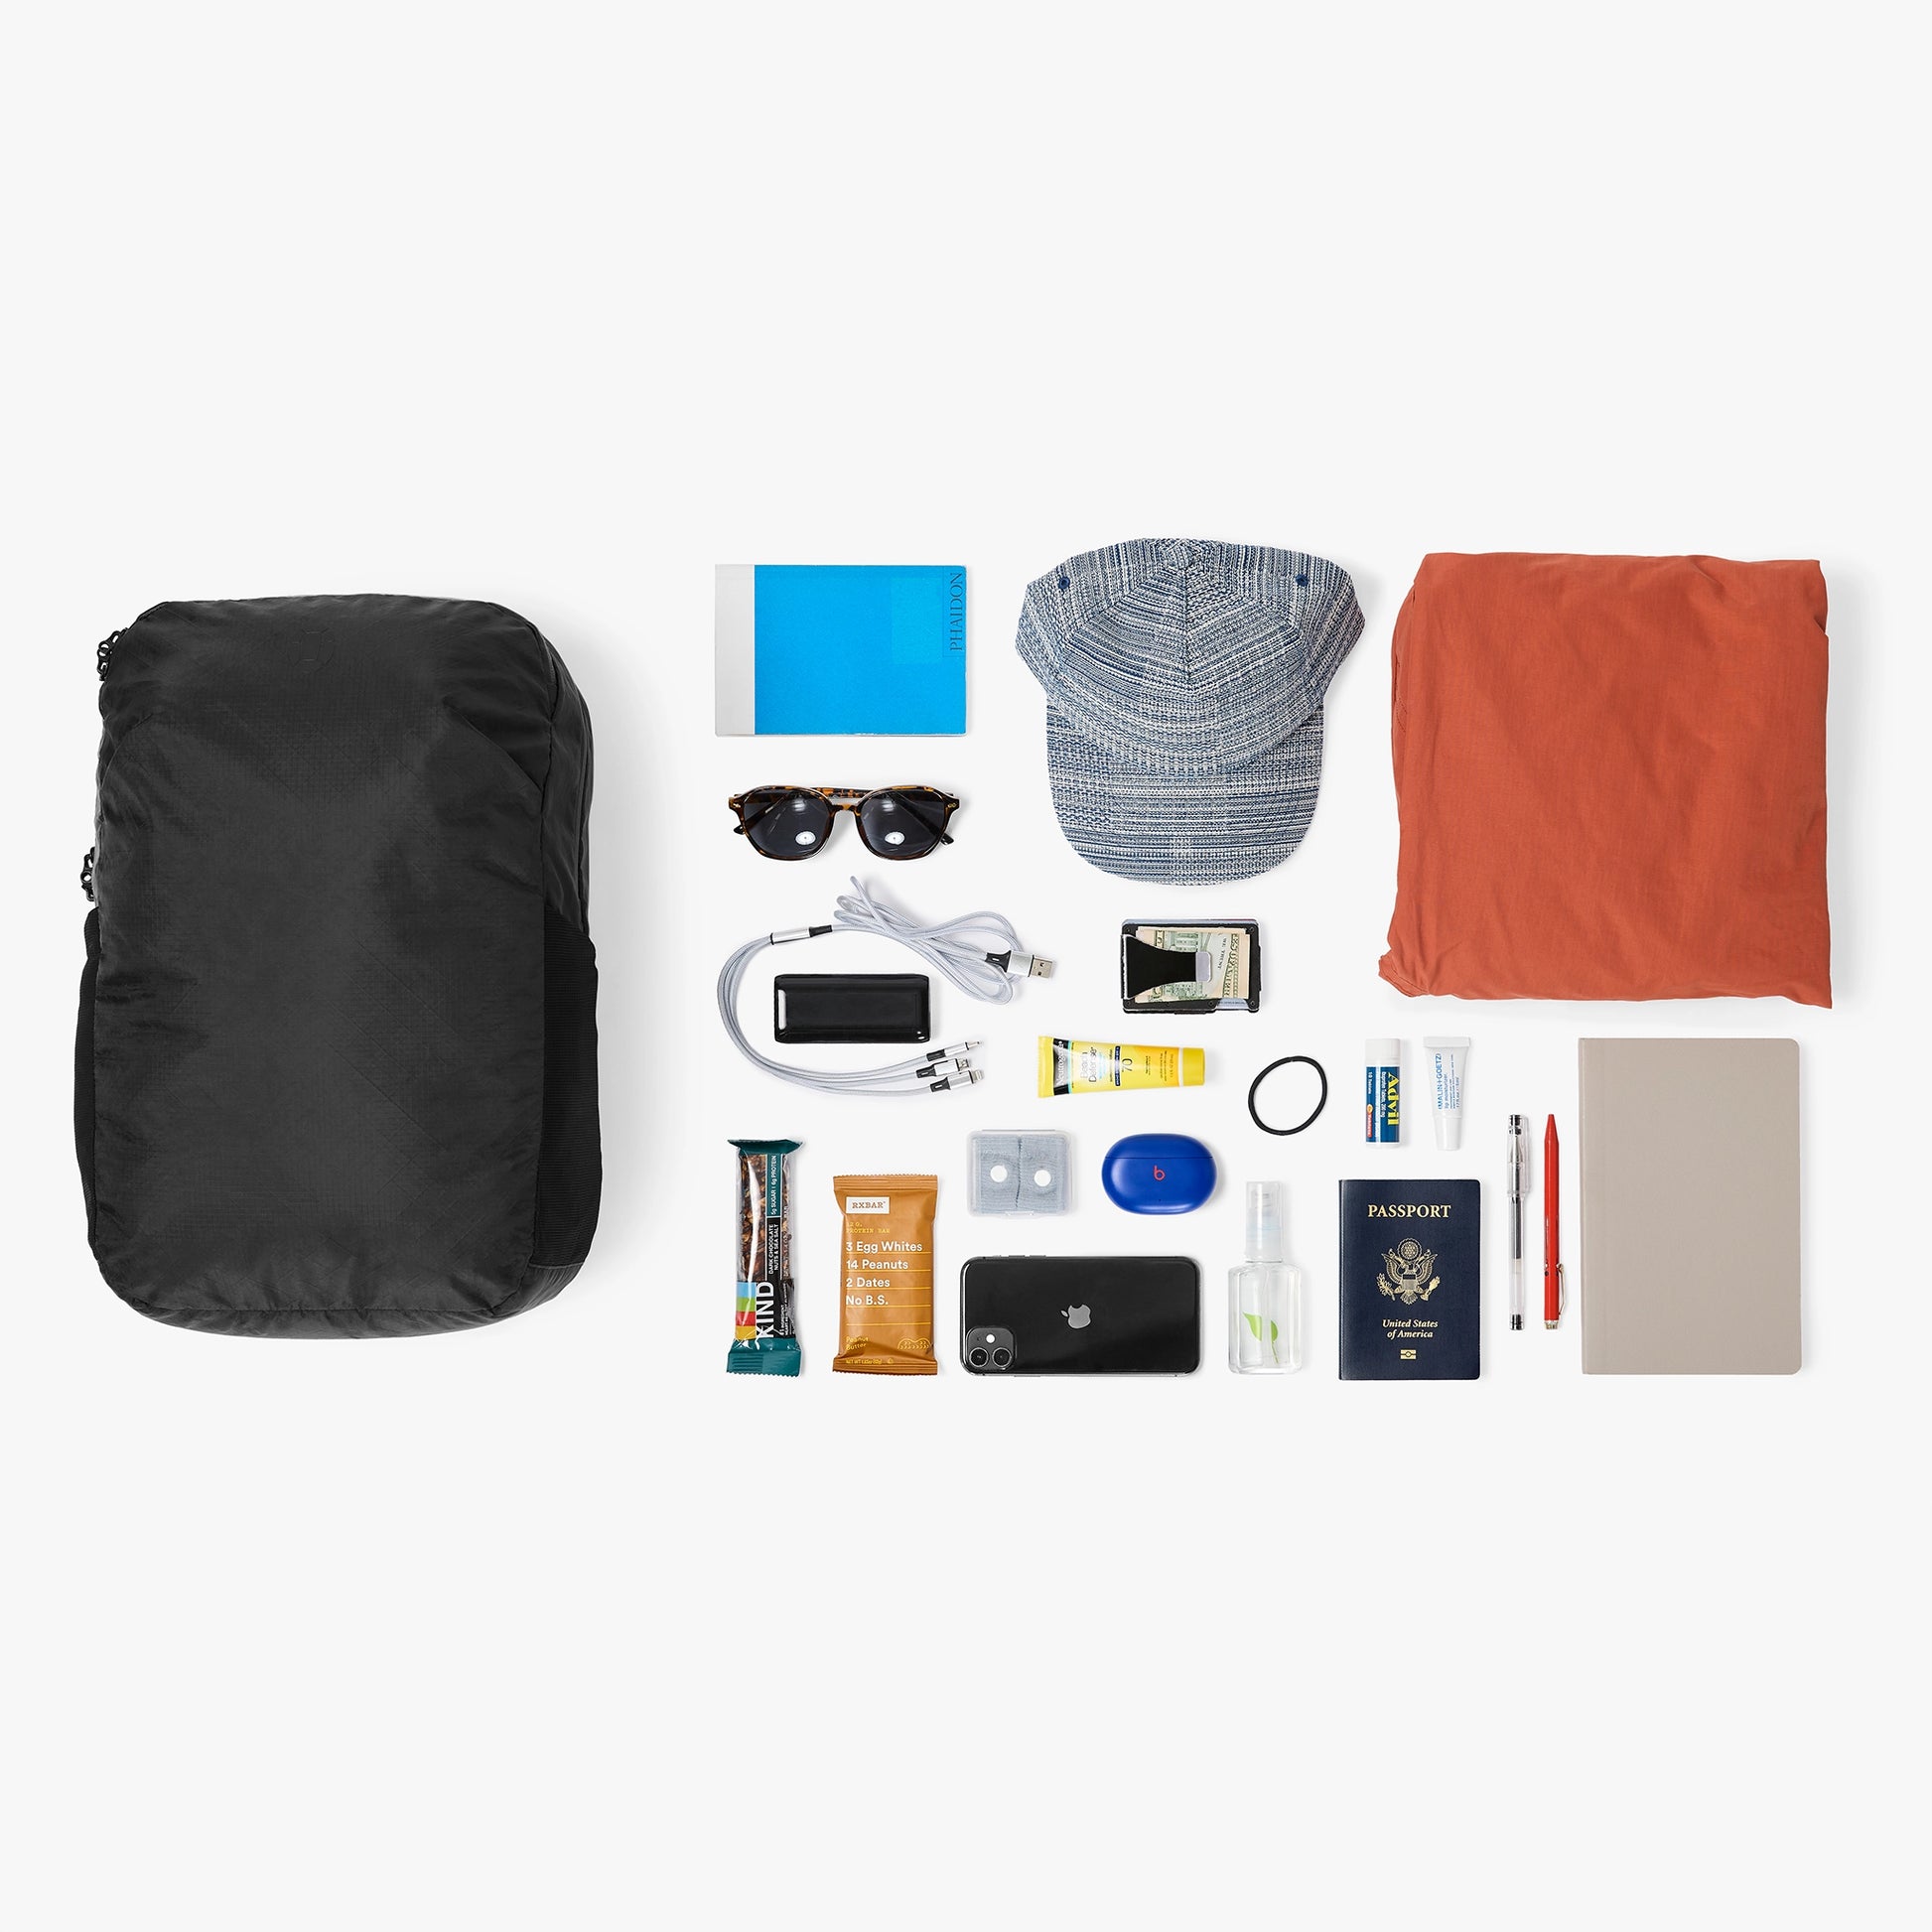 Pack for a day of sightseeing